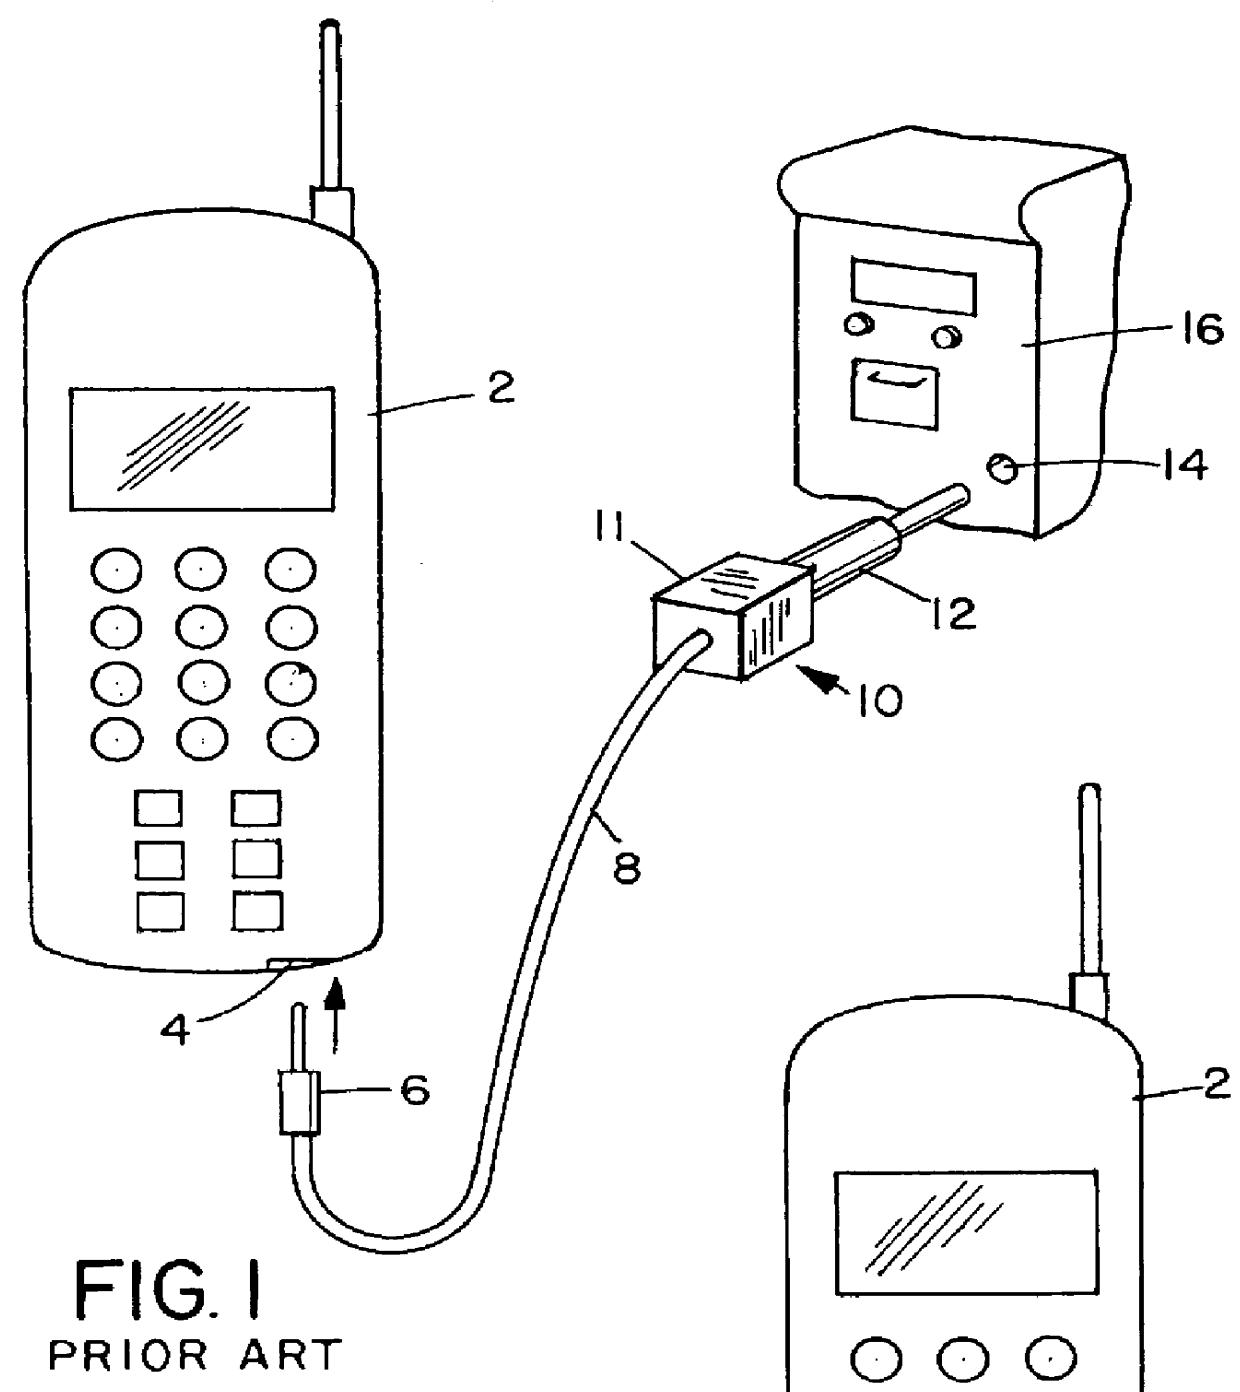 Two-part battery charger/power cable article with multiple device capability